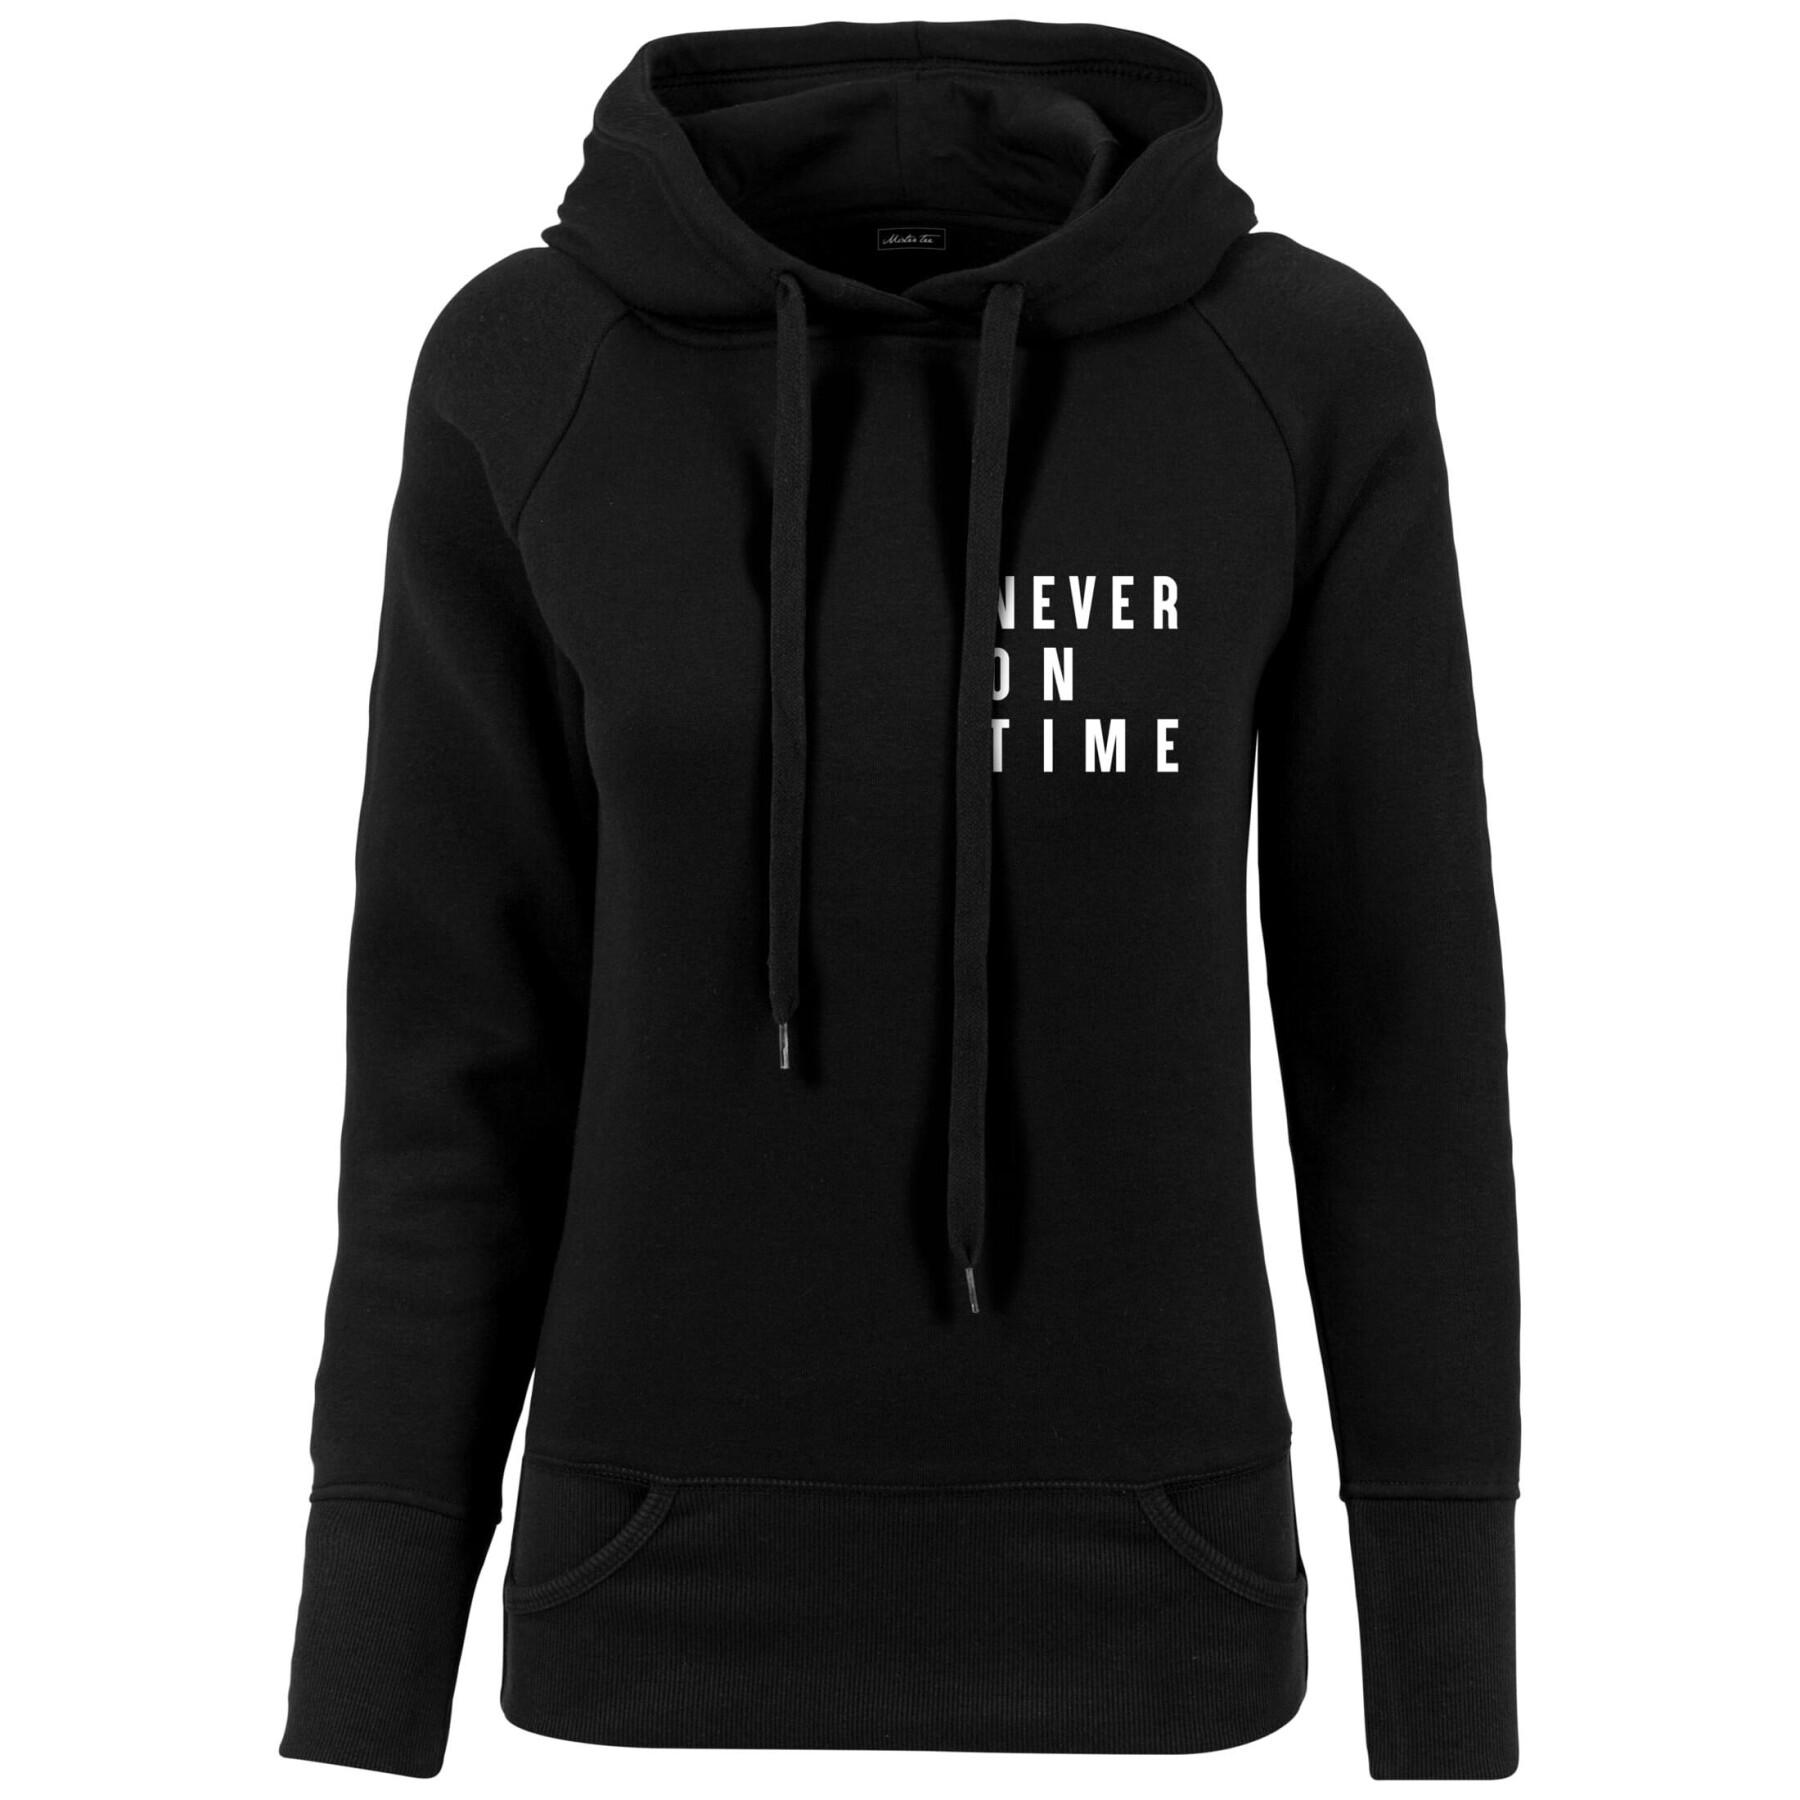 Hoodie Damen Mister Tee Never On Time